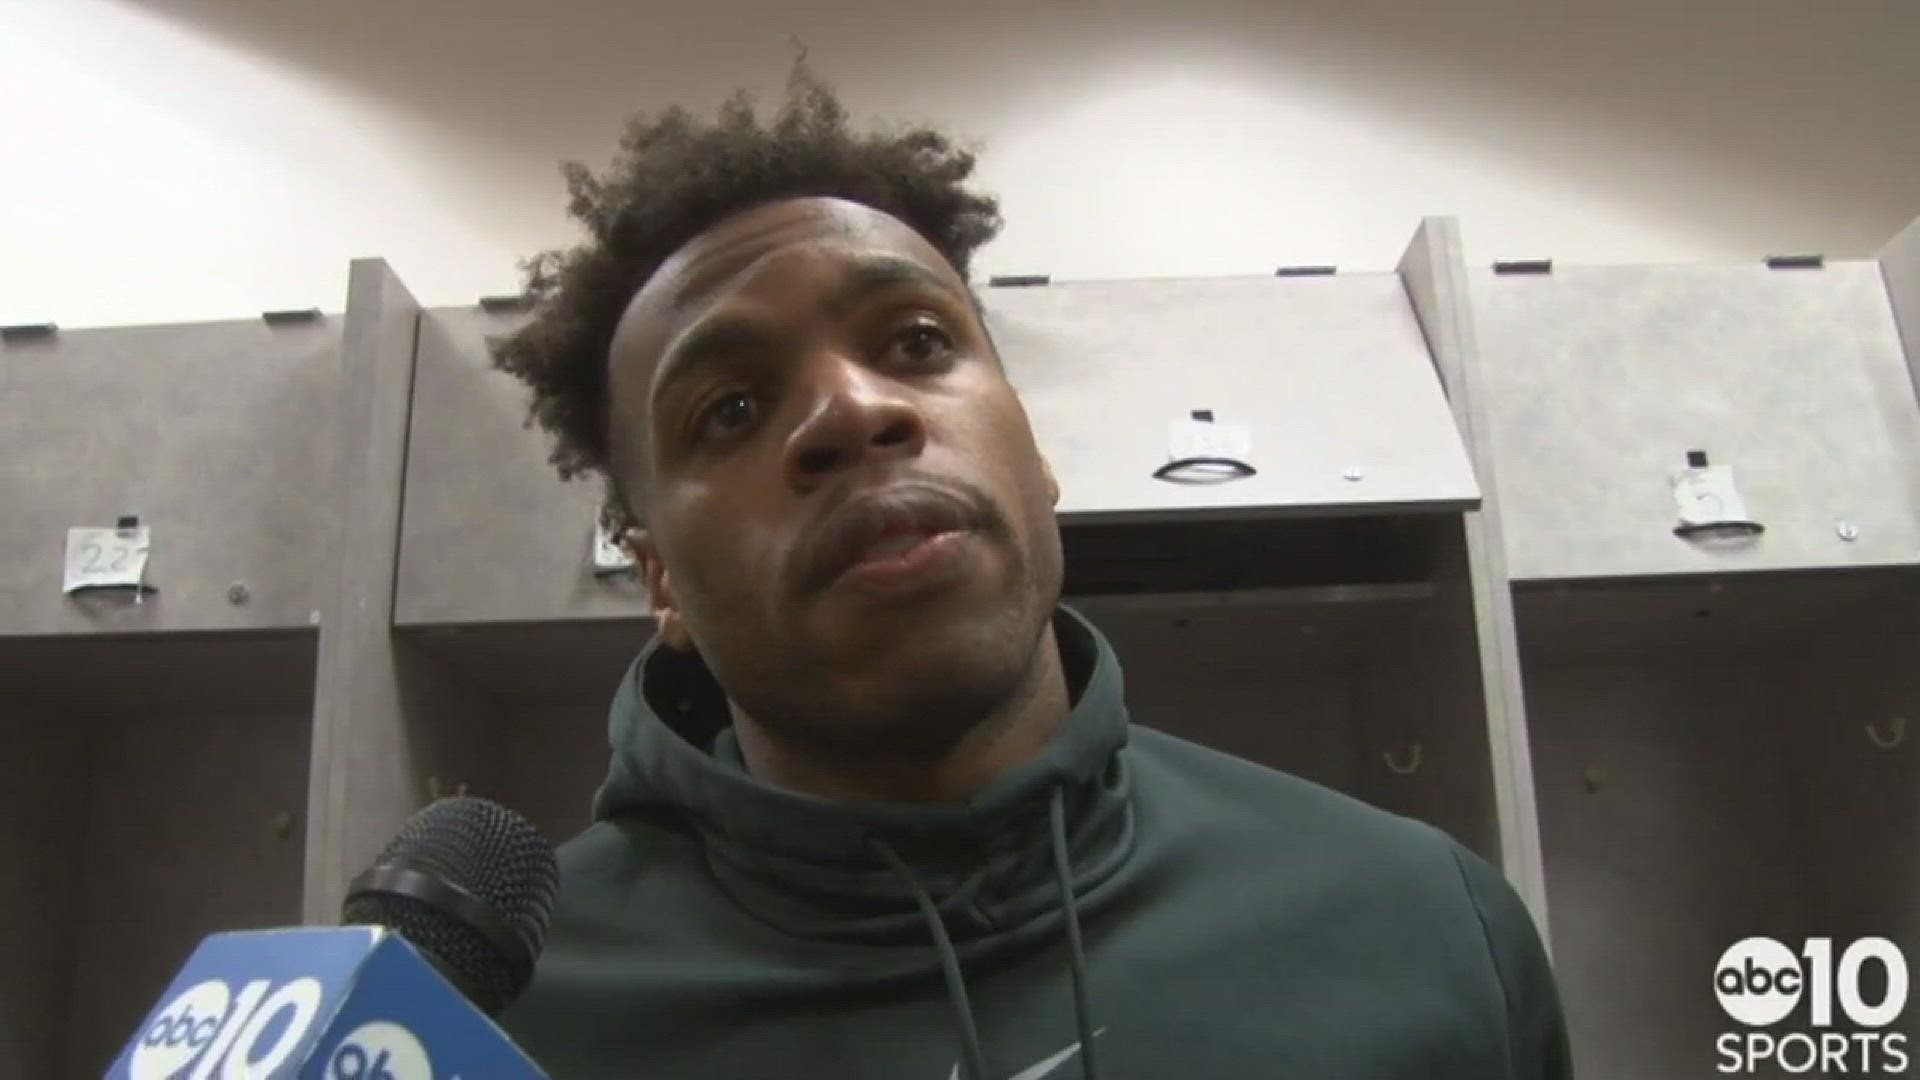 Kings guard Buddy Hield talks to ABC10's Sean Cunningham about Sacramento's second victory over the Warriors in Oakland this season, on Friday night.